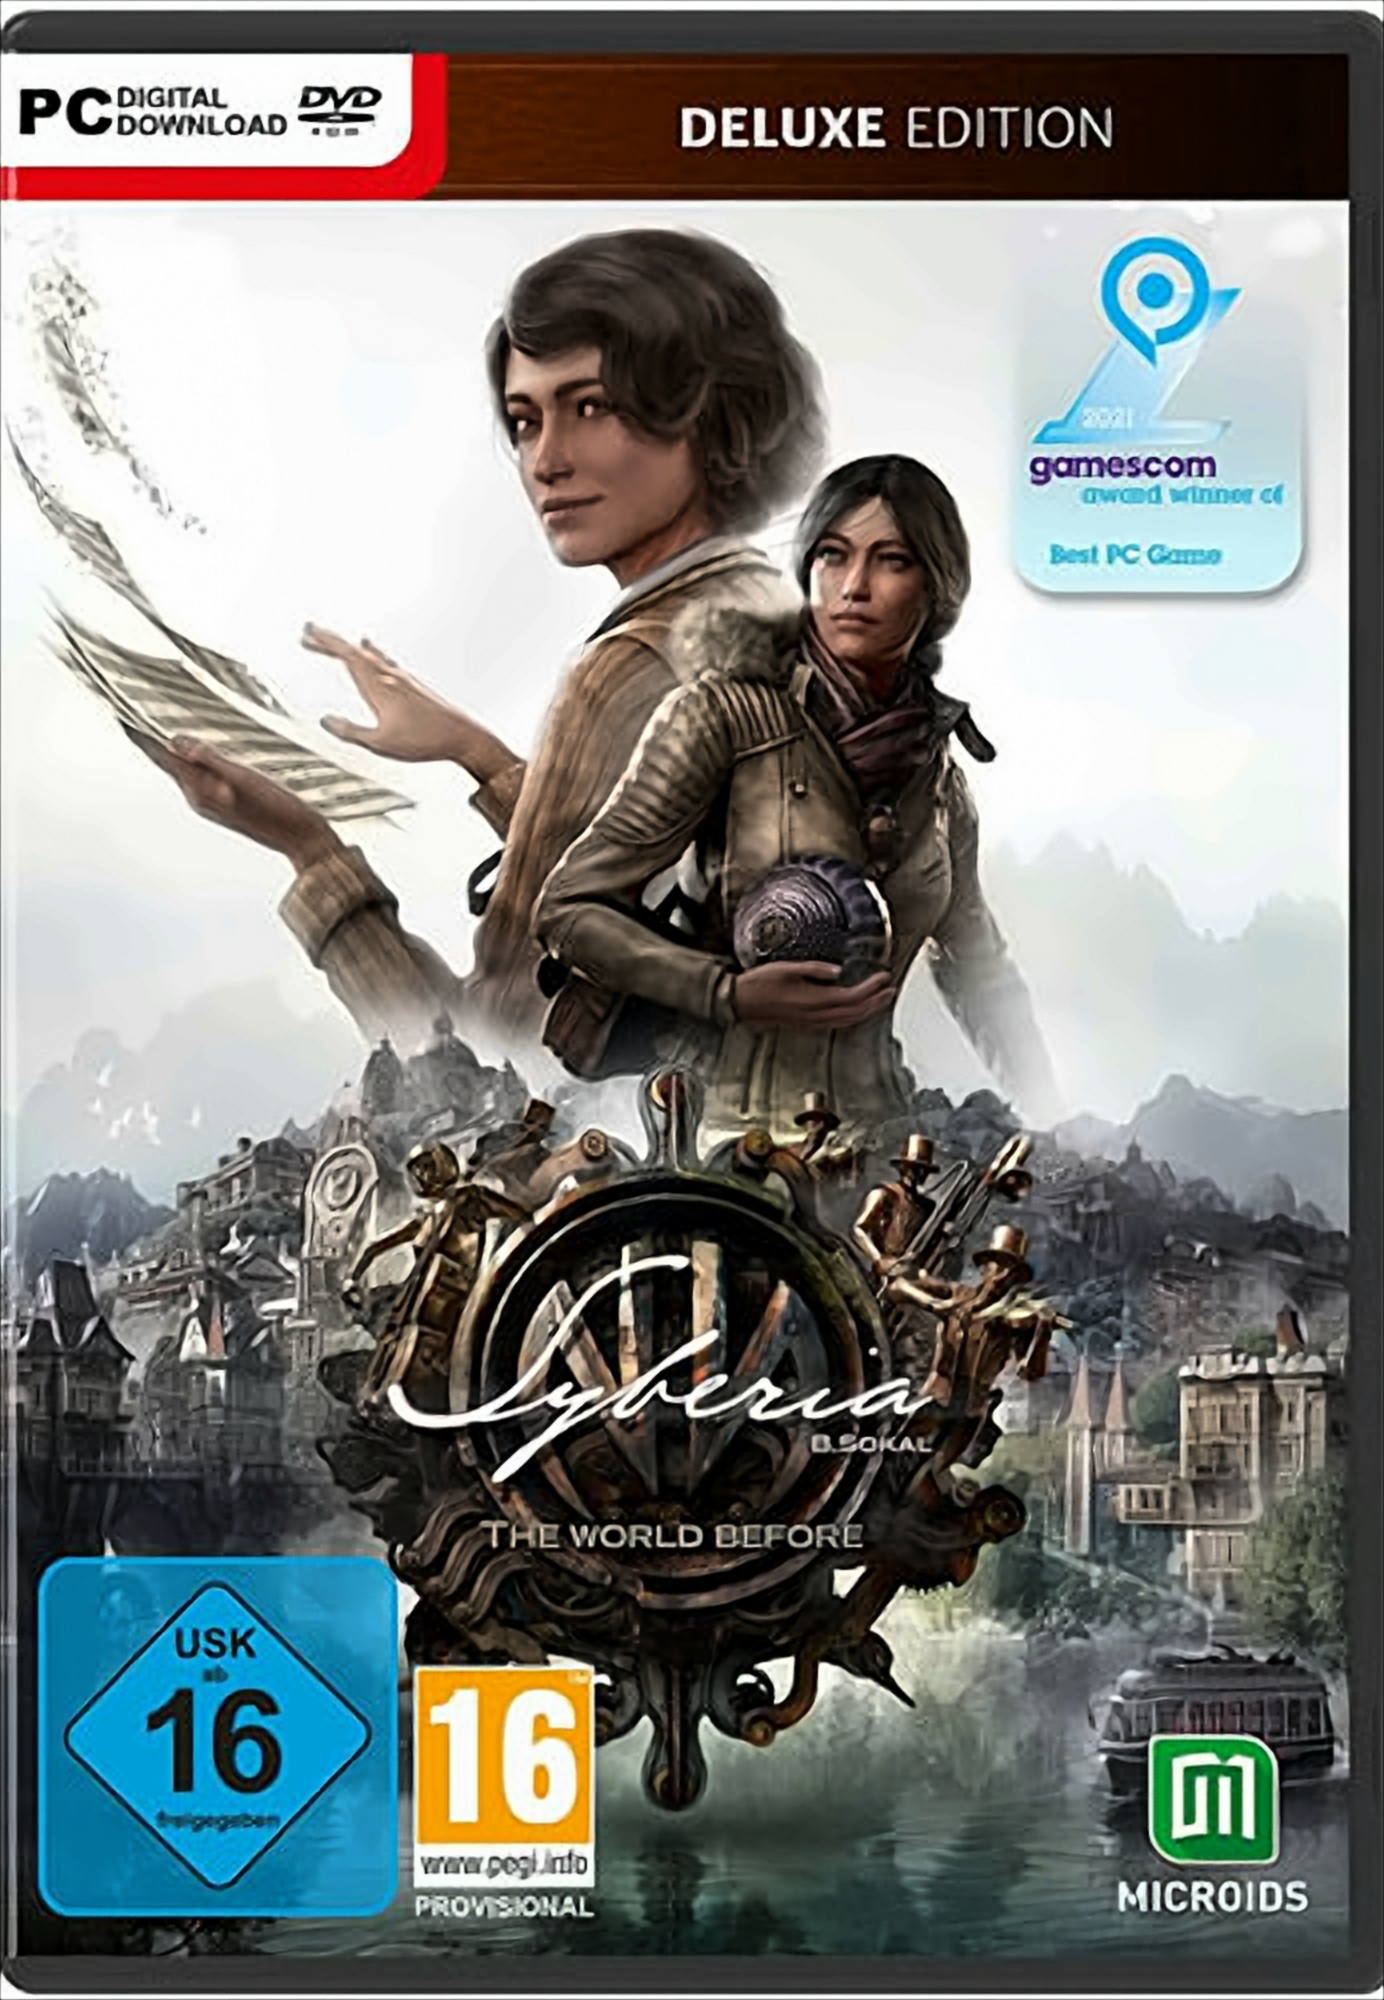 - Before DELUXE Syberia: The [PC] PC World